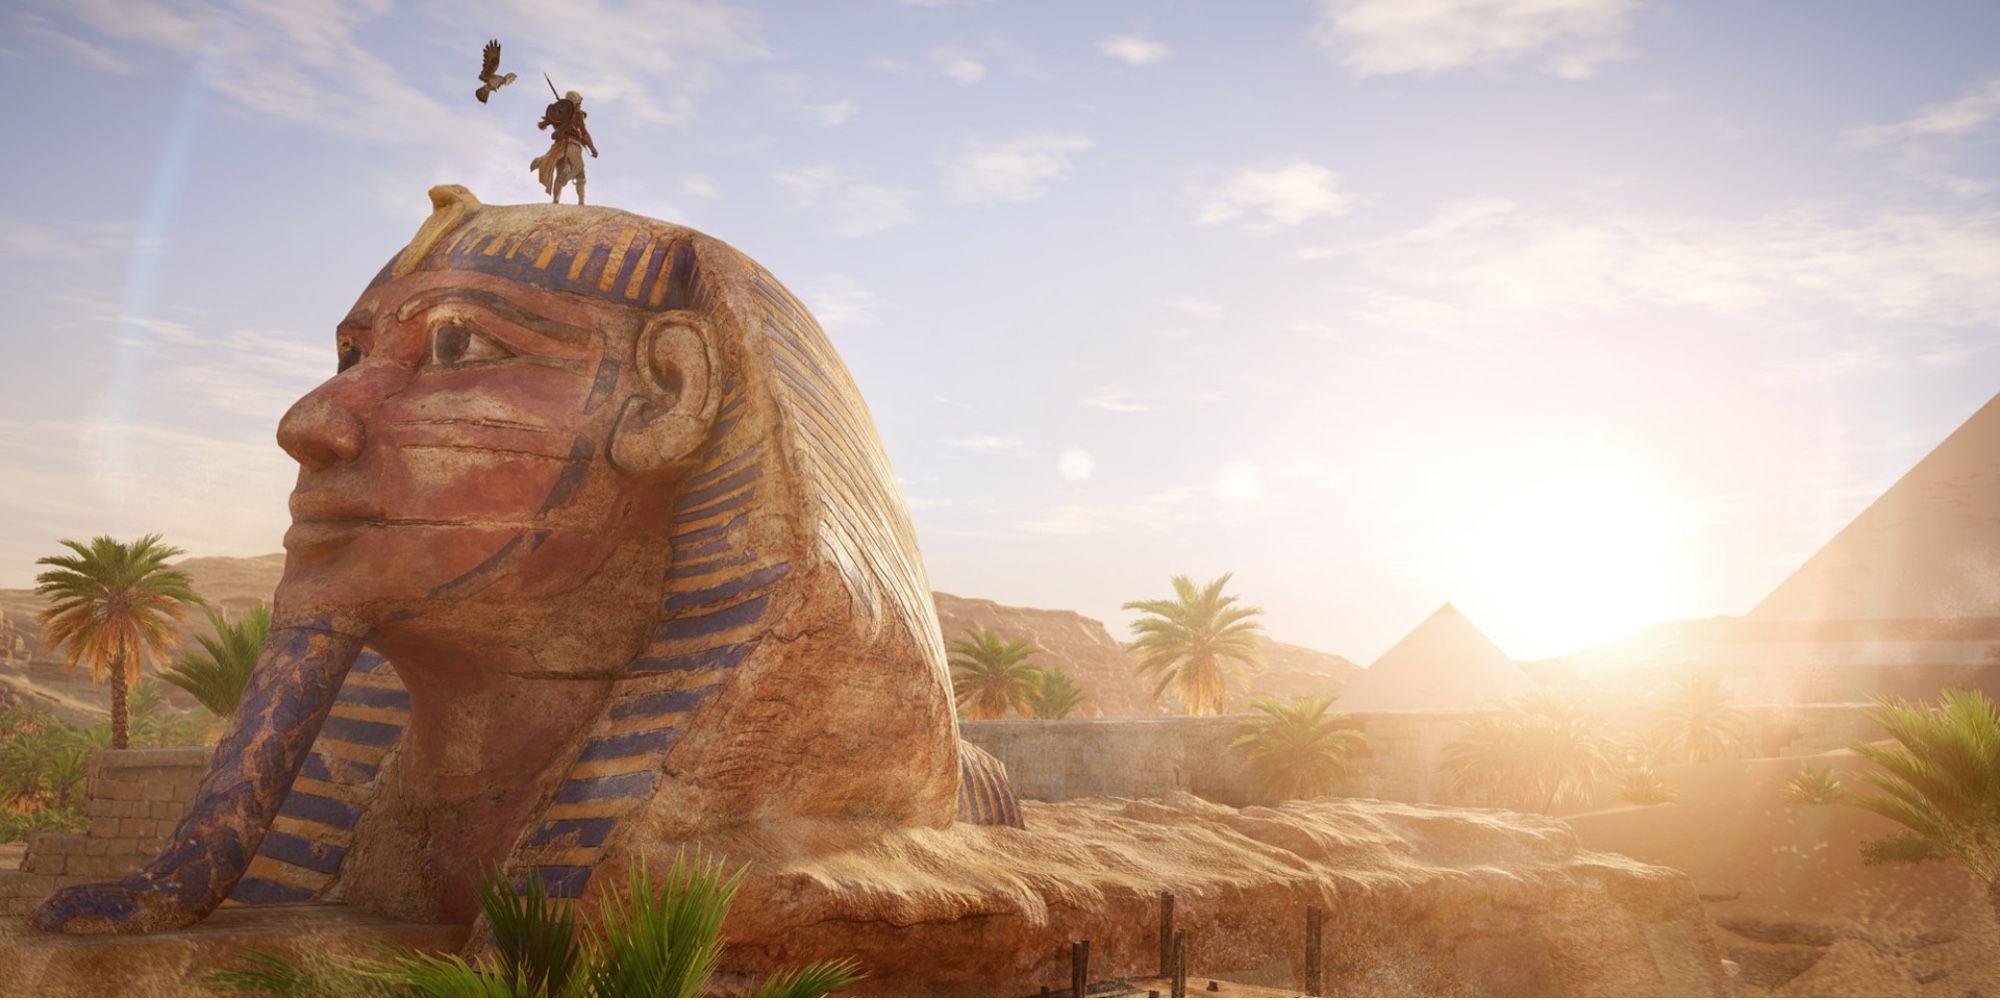 Popular Games on Steam - Assassin's Creed Origins - Player watches the Sun rise